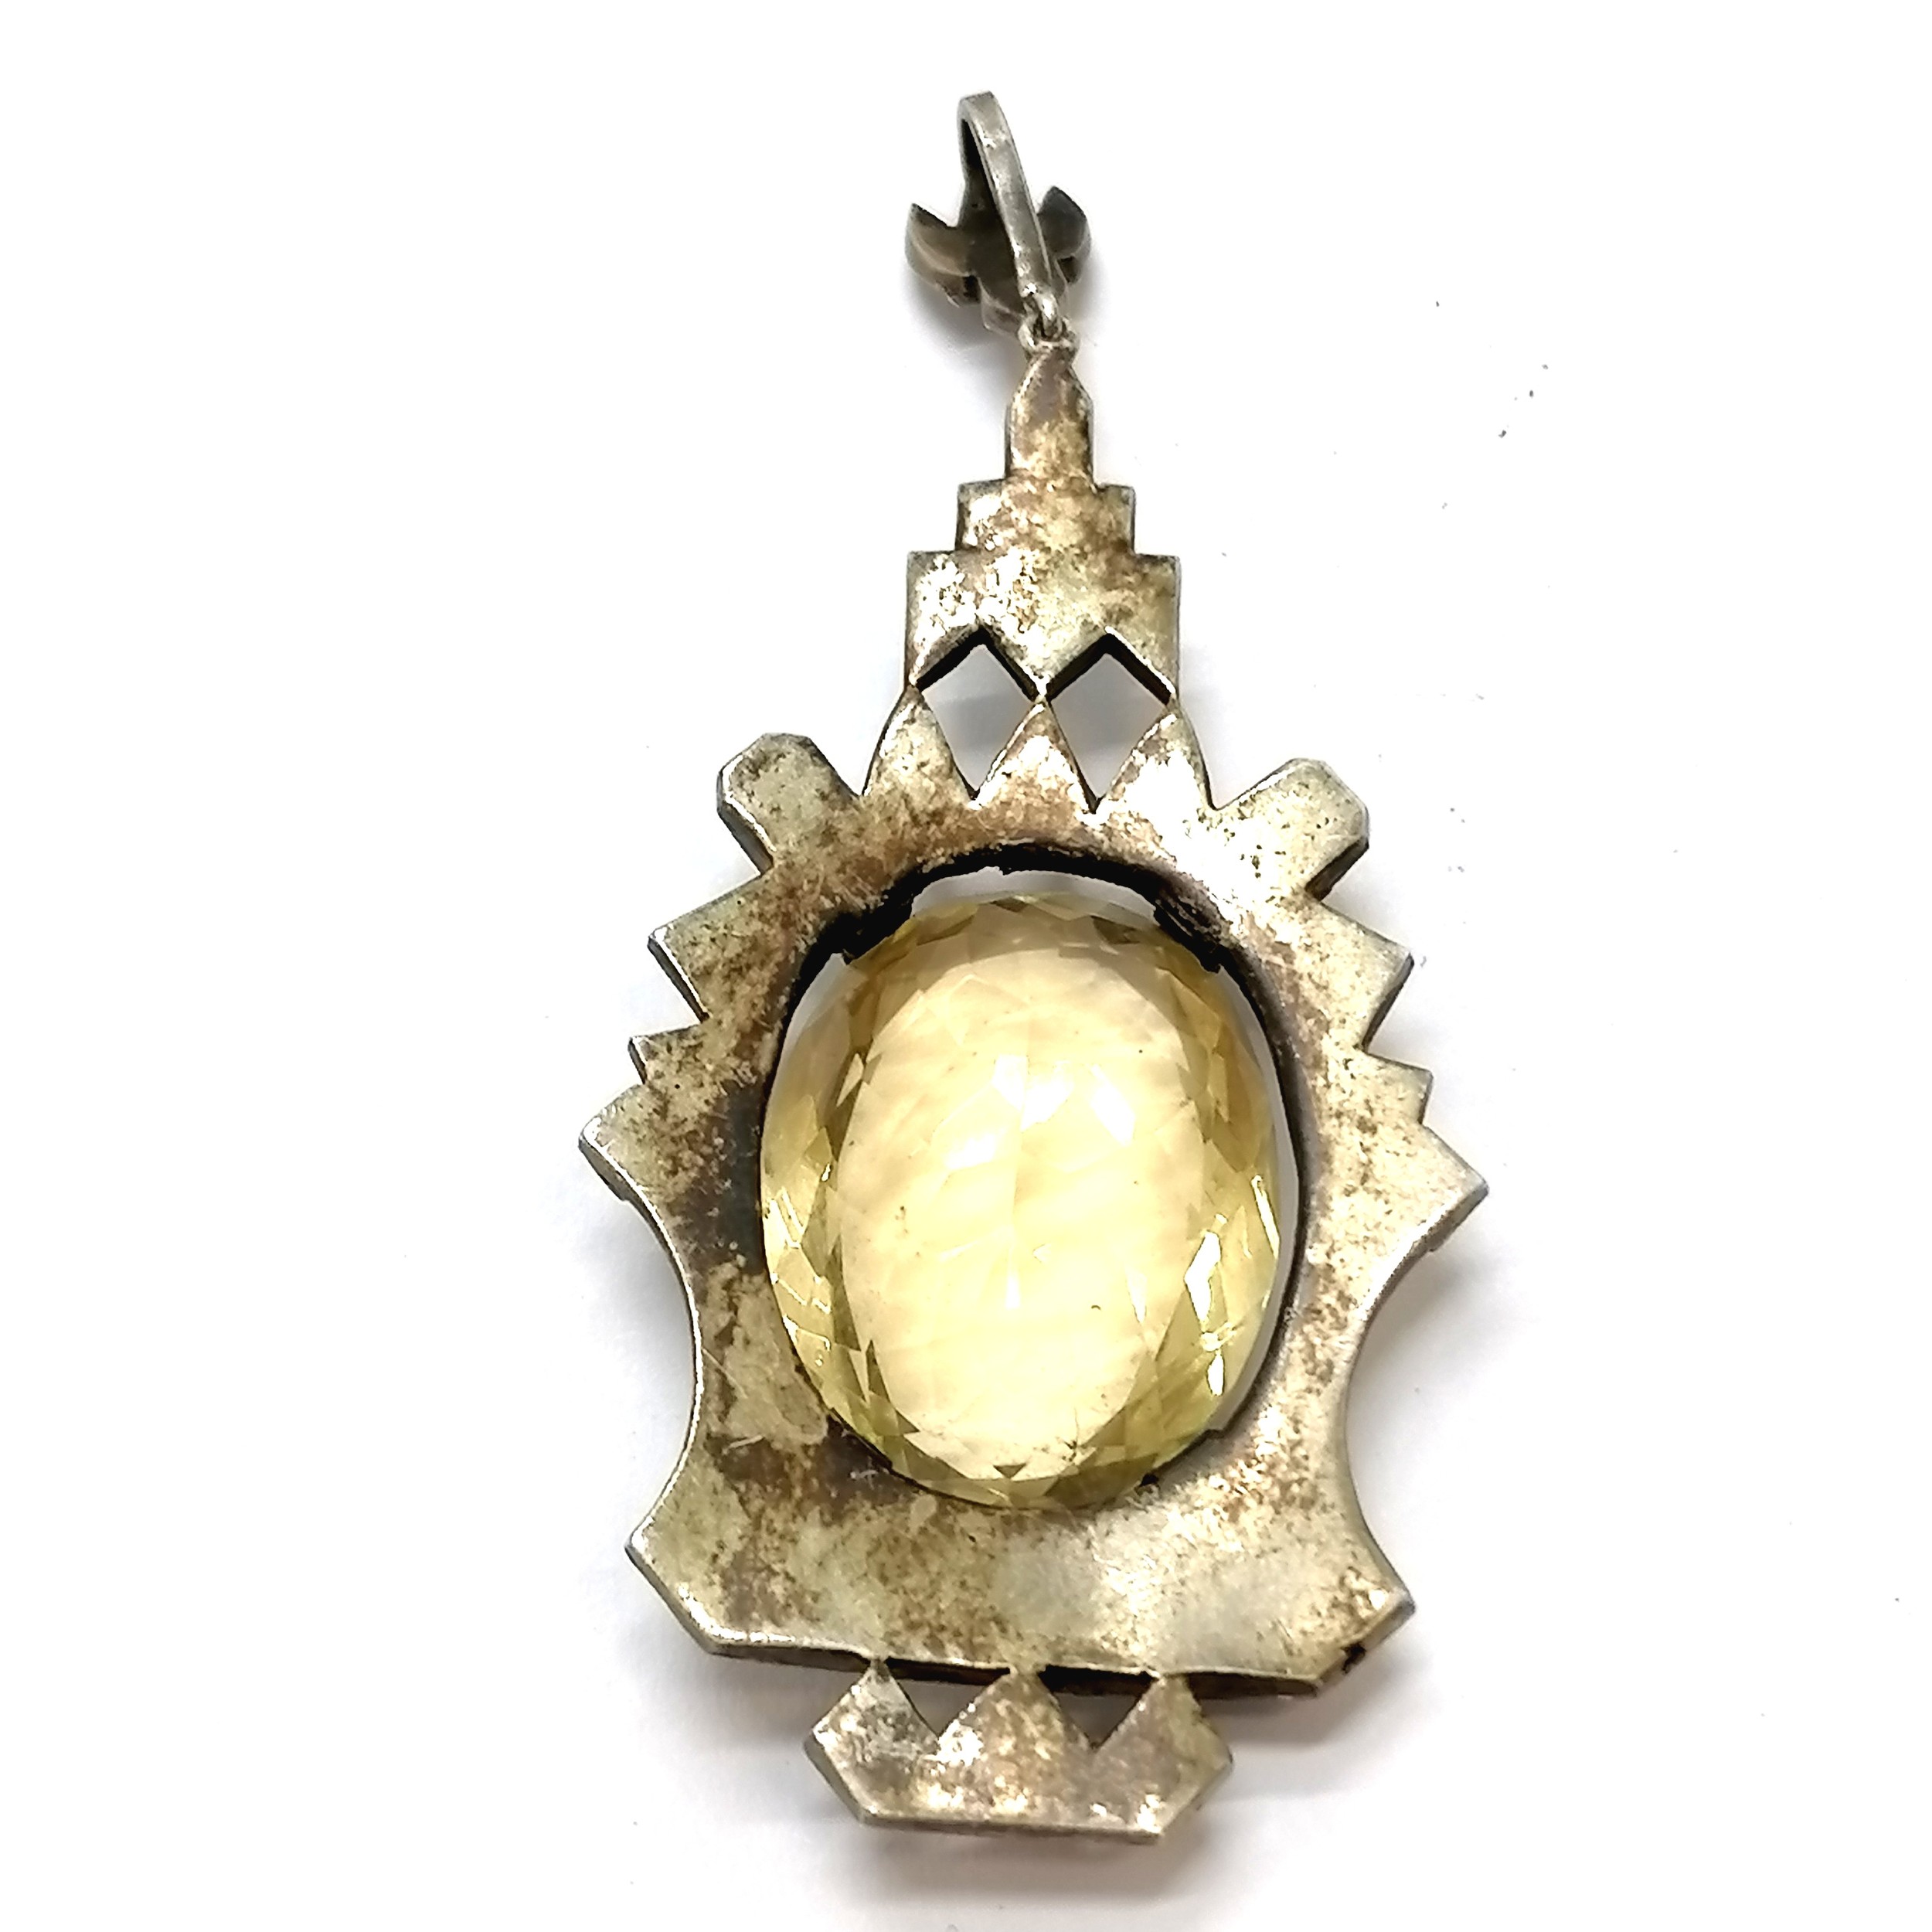 Large unmarked silver antique pendant set with citrine & marcasite - 6cm & 13g total weight & no - Image 2 of 2